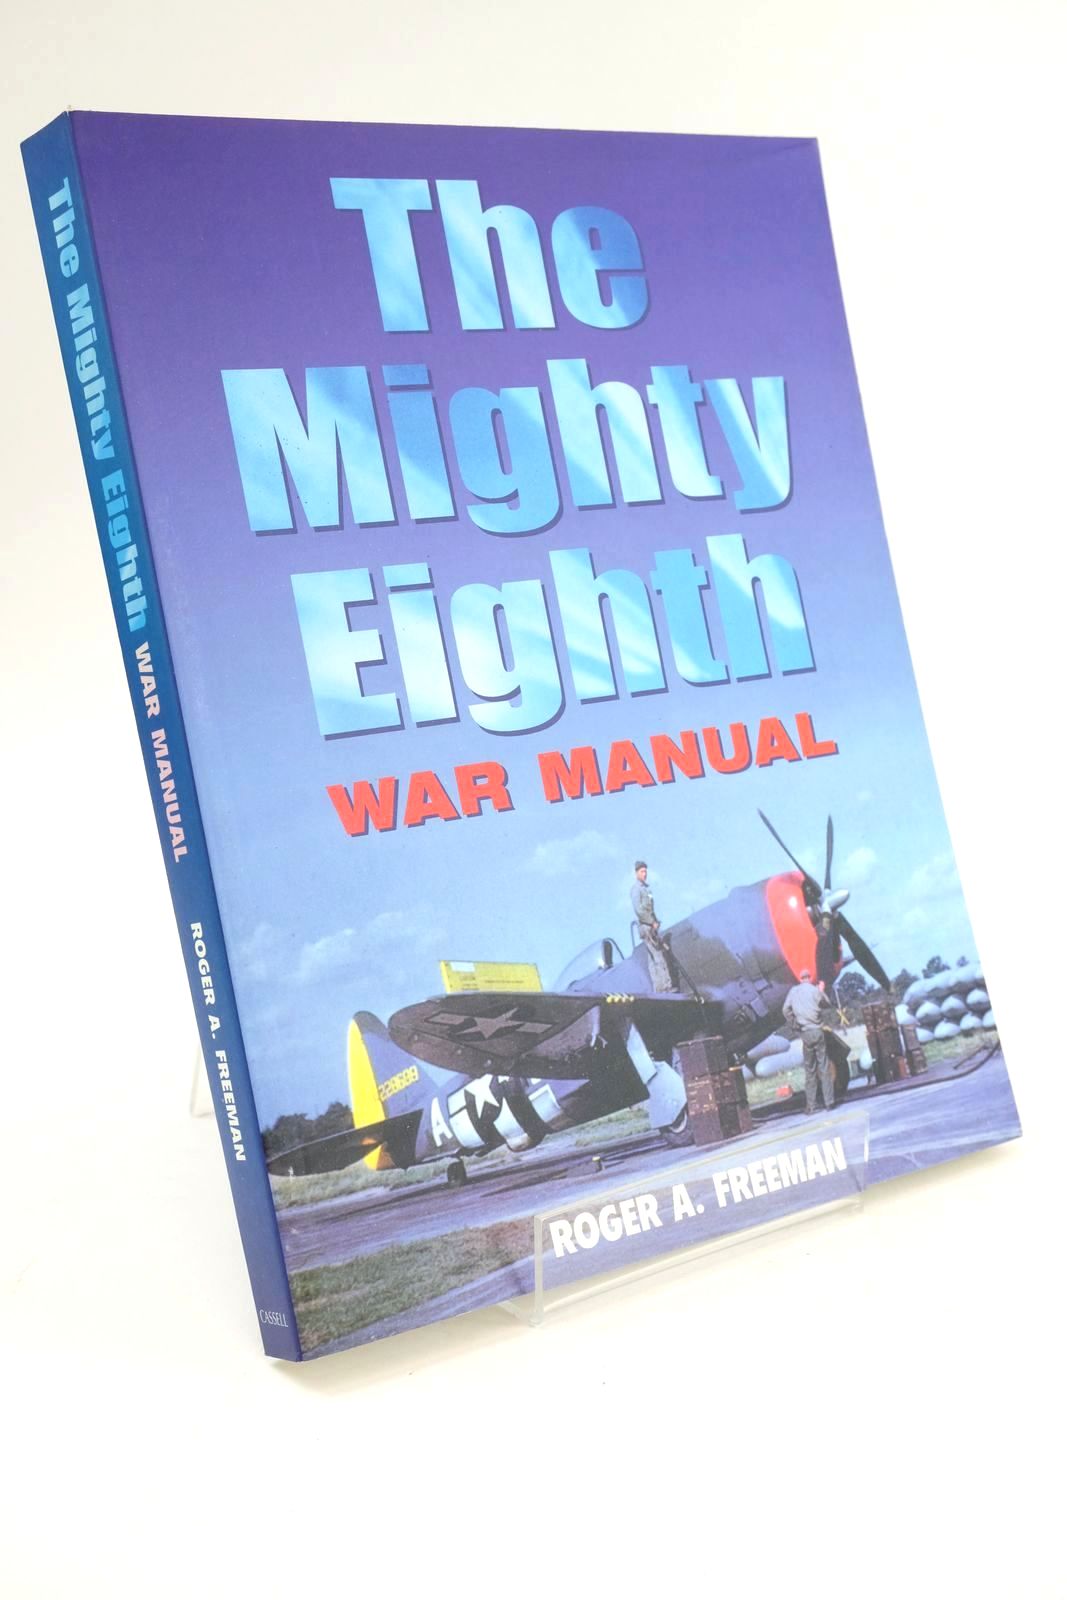 Photo of THE MIGHTY EIGHTH WAR MANUAL- Stock Number: 1325150